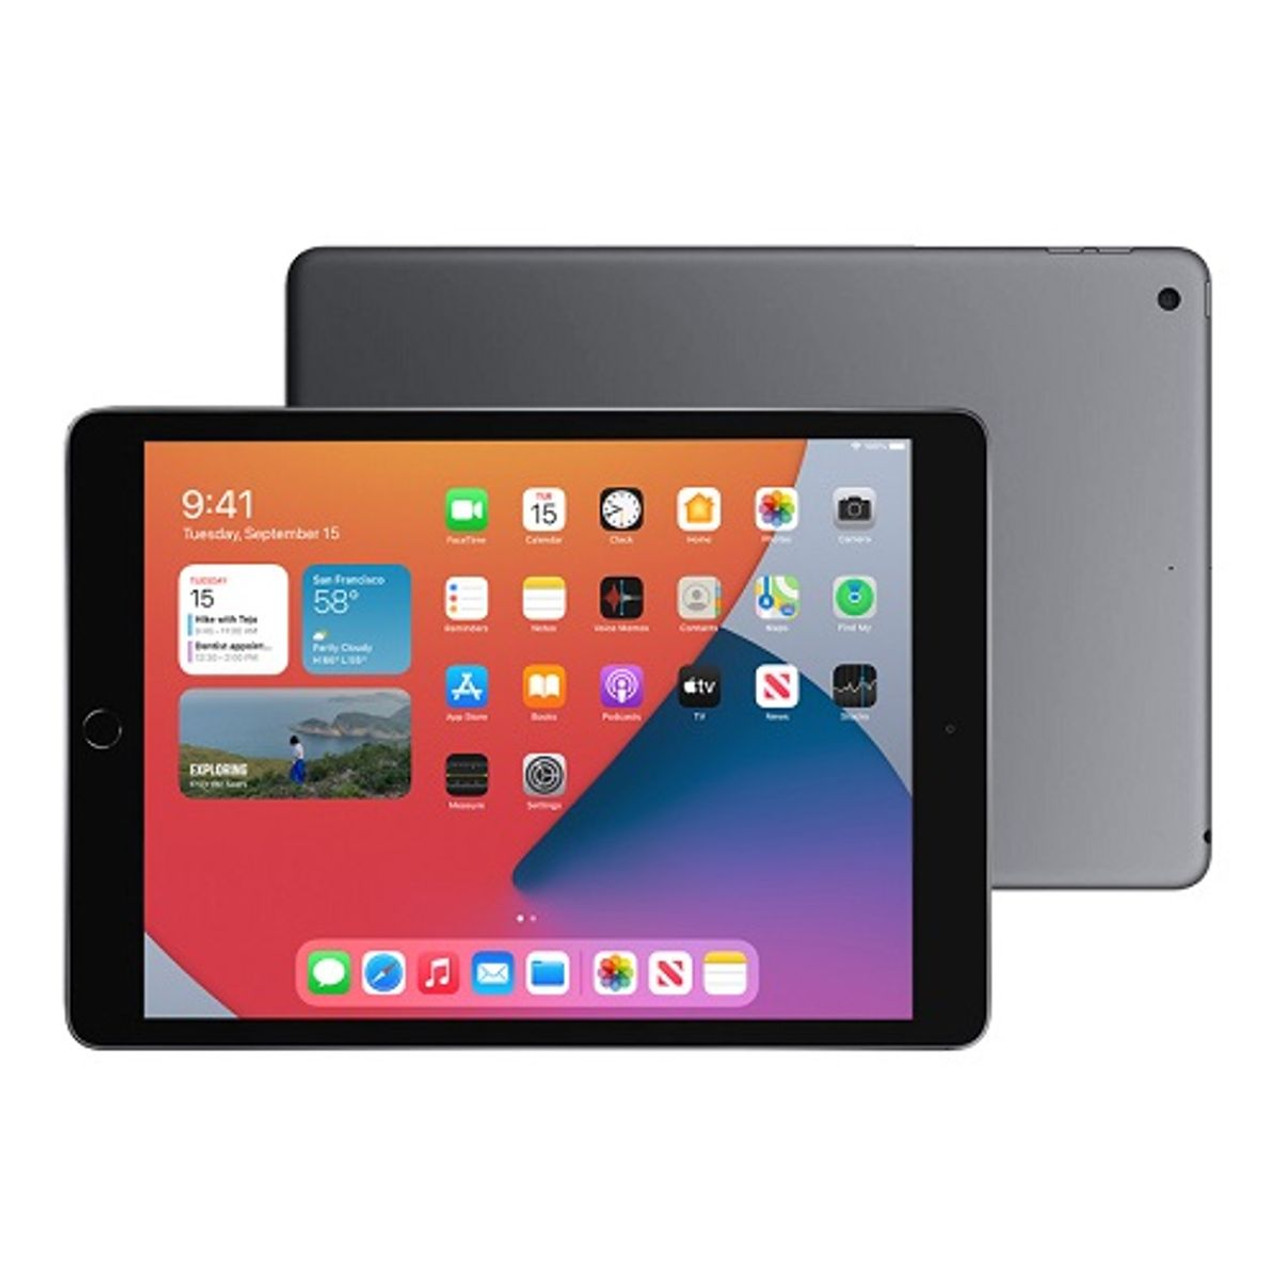 Apple® iPad, 10.2-Inch, 32GB, Wi-Fi Only, MW742LL/A (Gen 7) product image